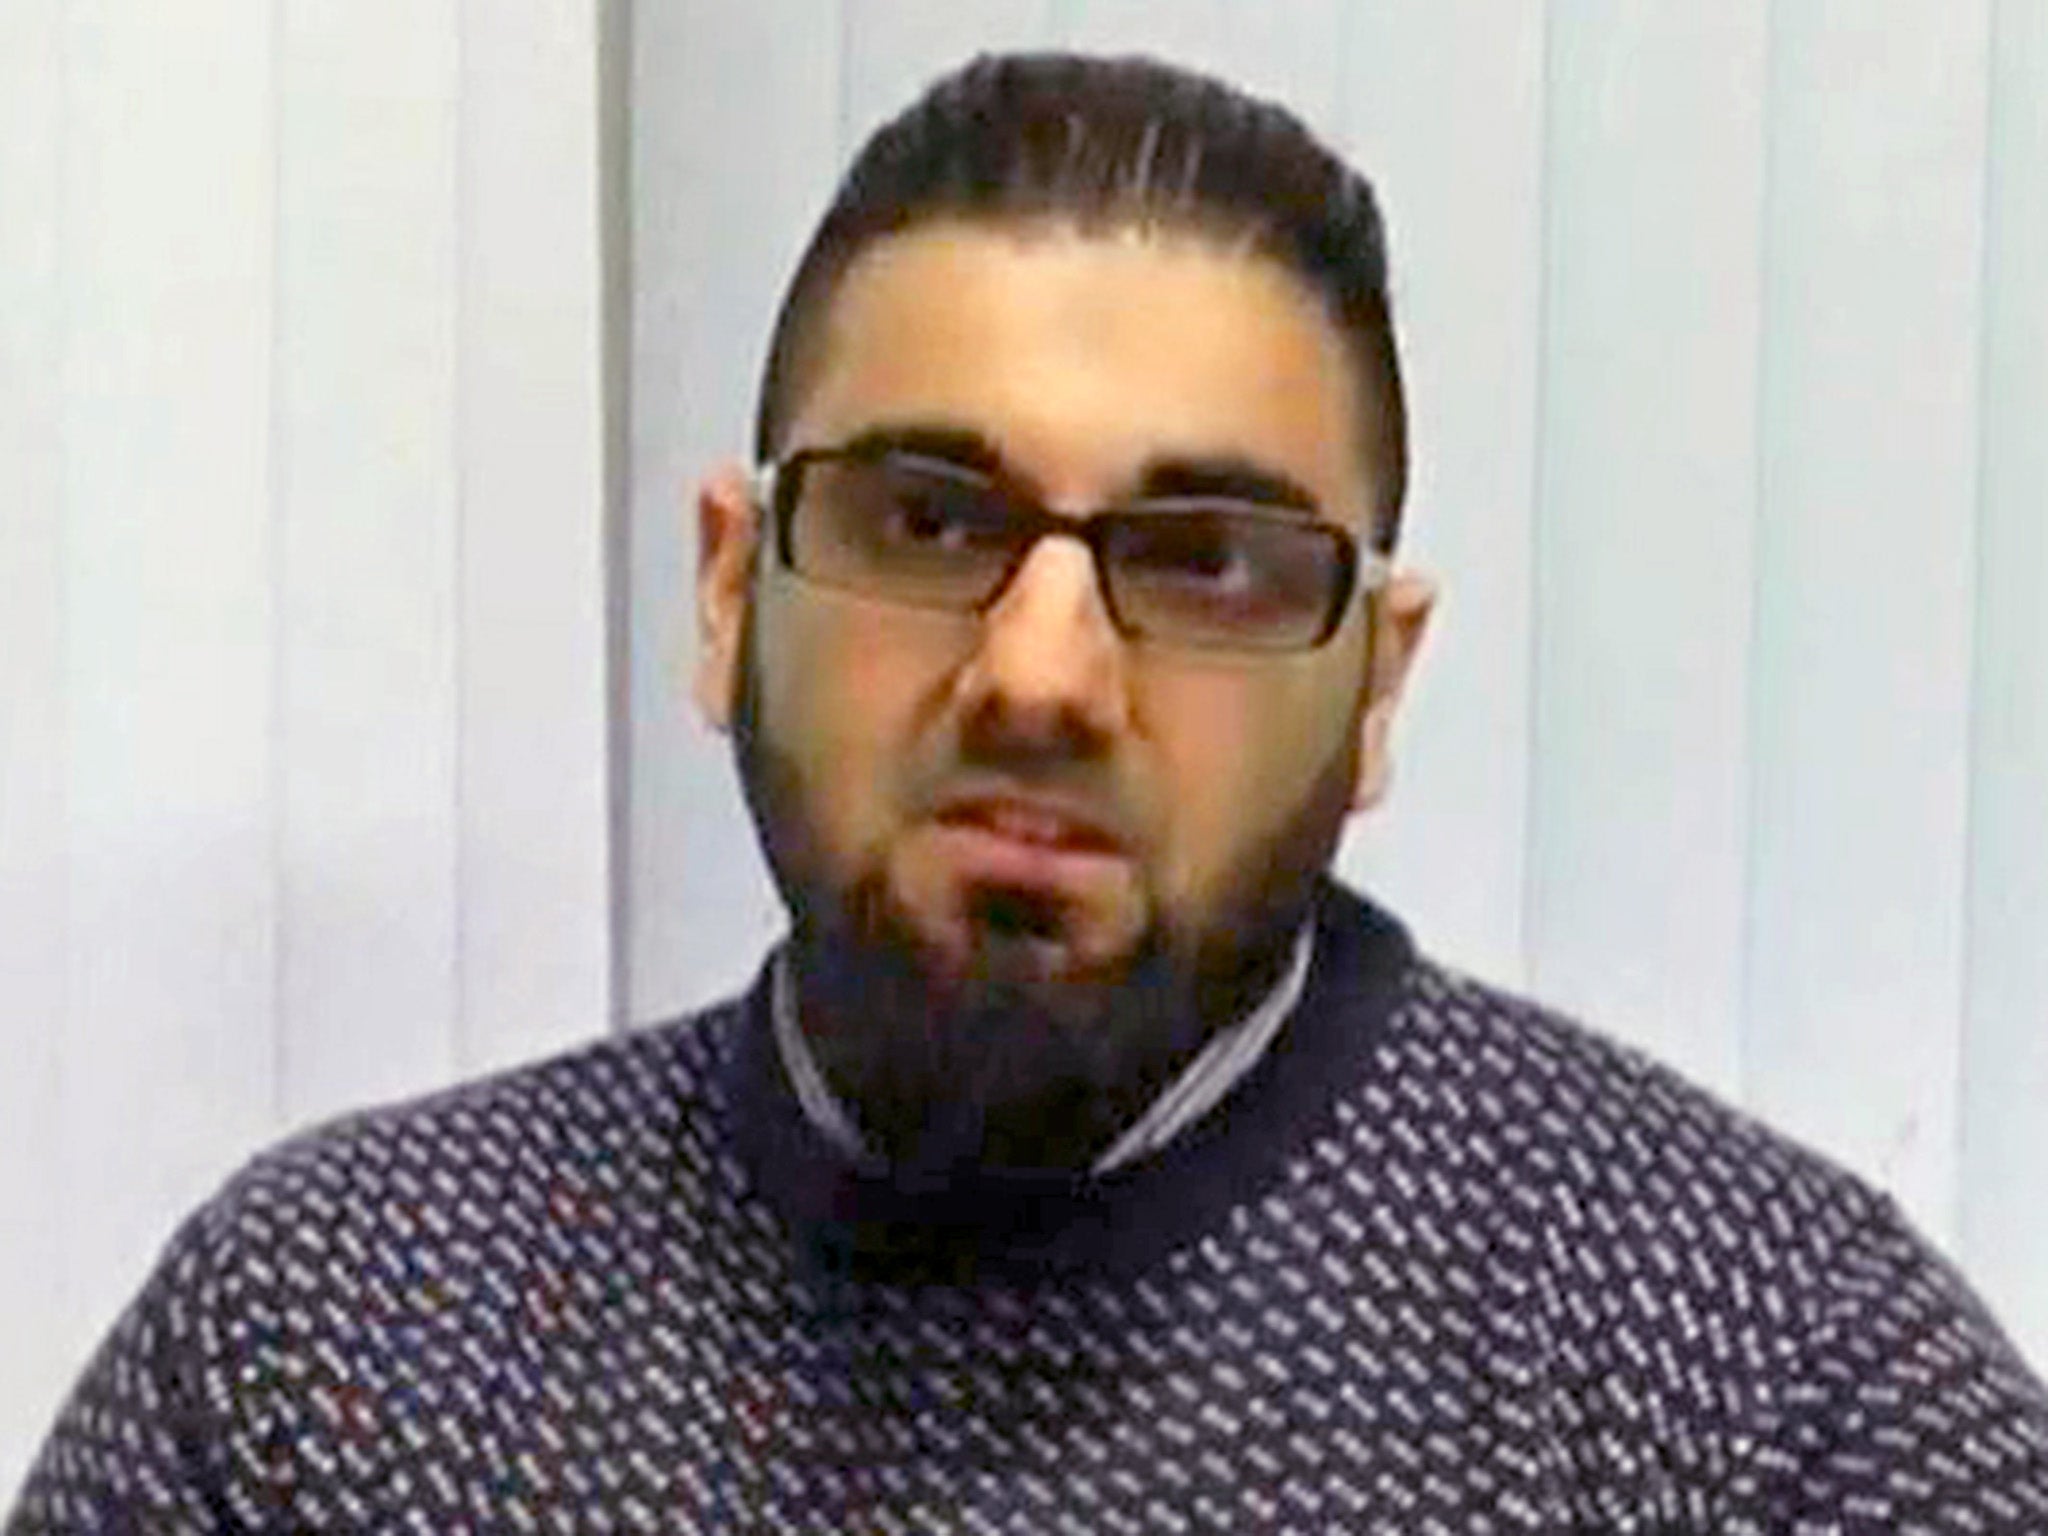 Usman Khan murdered two people at Fishmongers’ Hall in November 2019